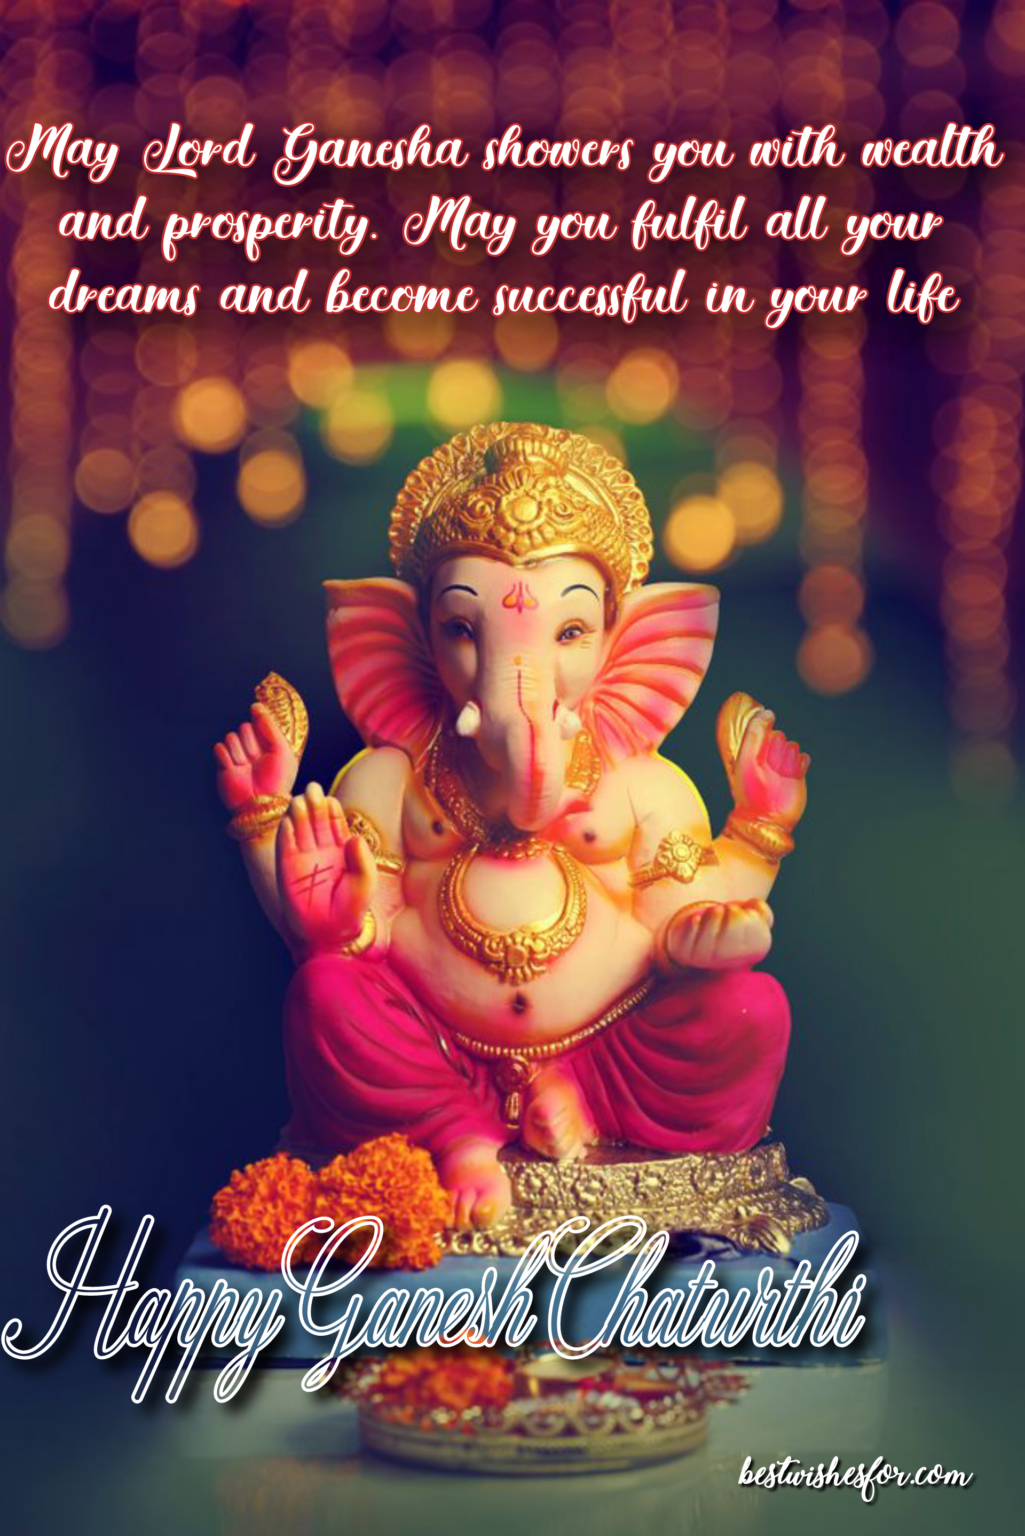 Happy Ganesh Chaturthi 2021 Wishes Quotes Images Messages And Sayings Best Wishes 1738